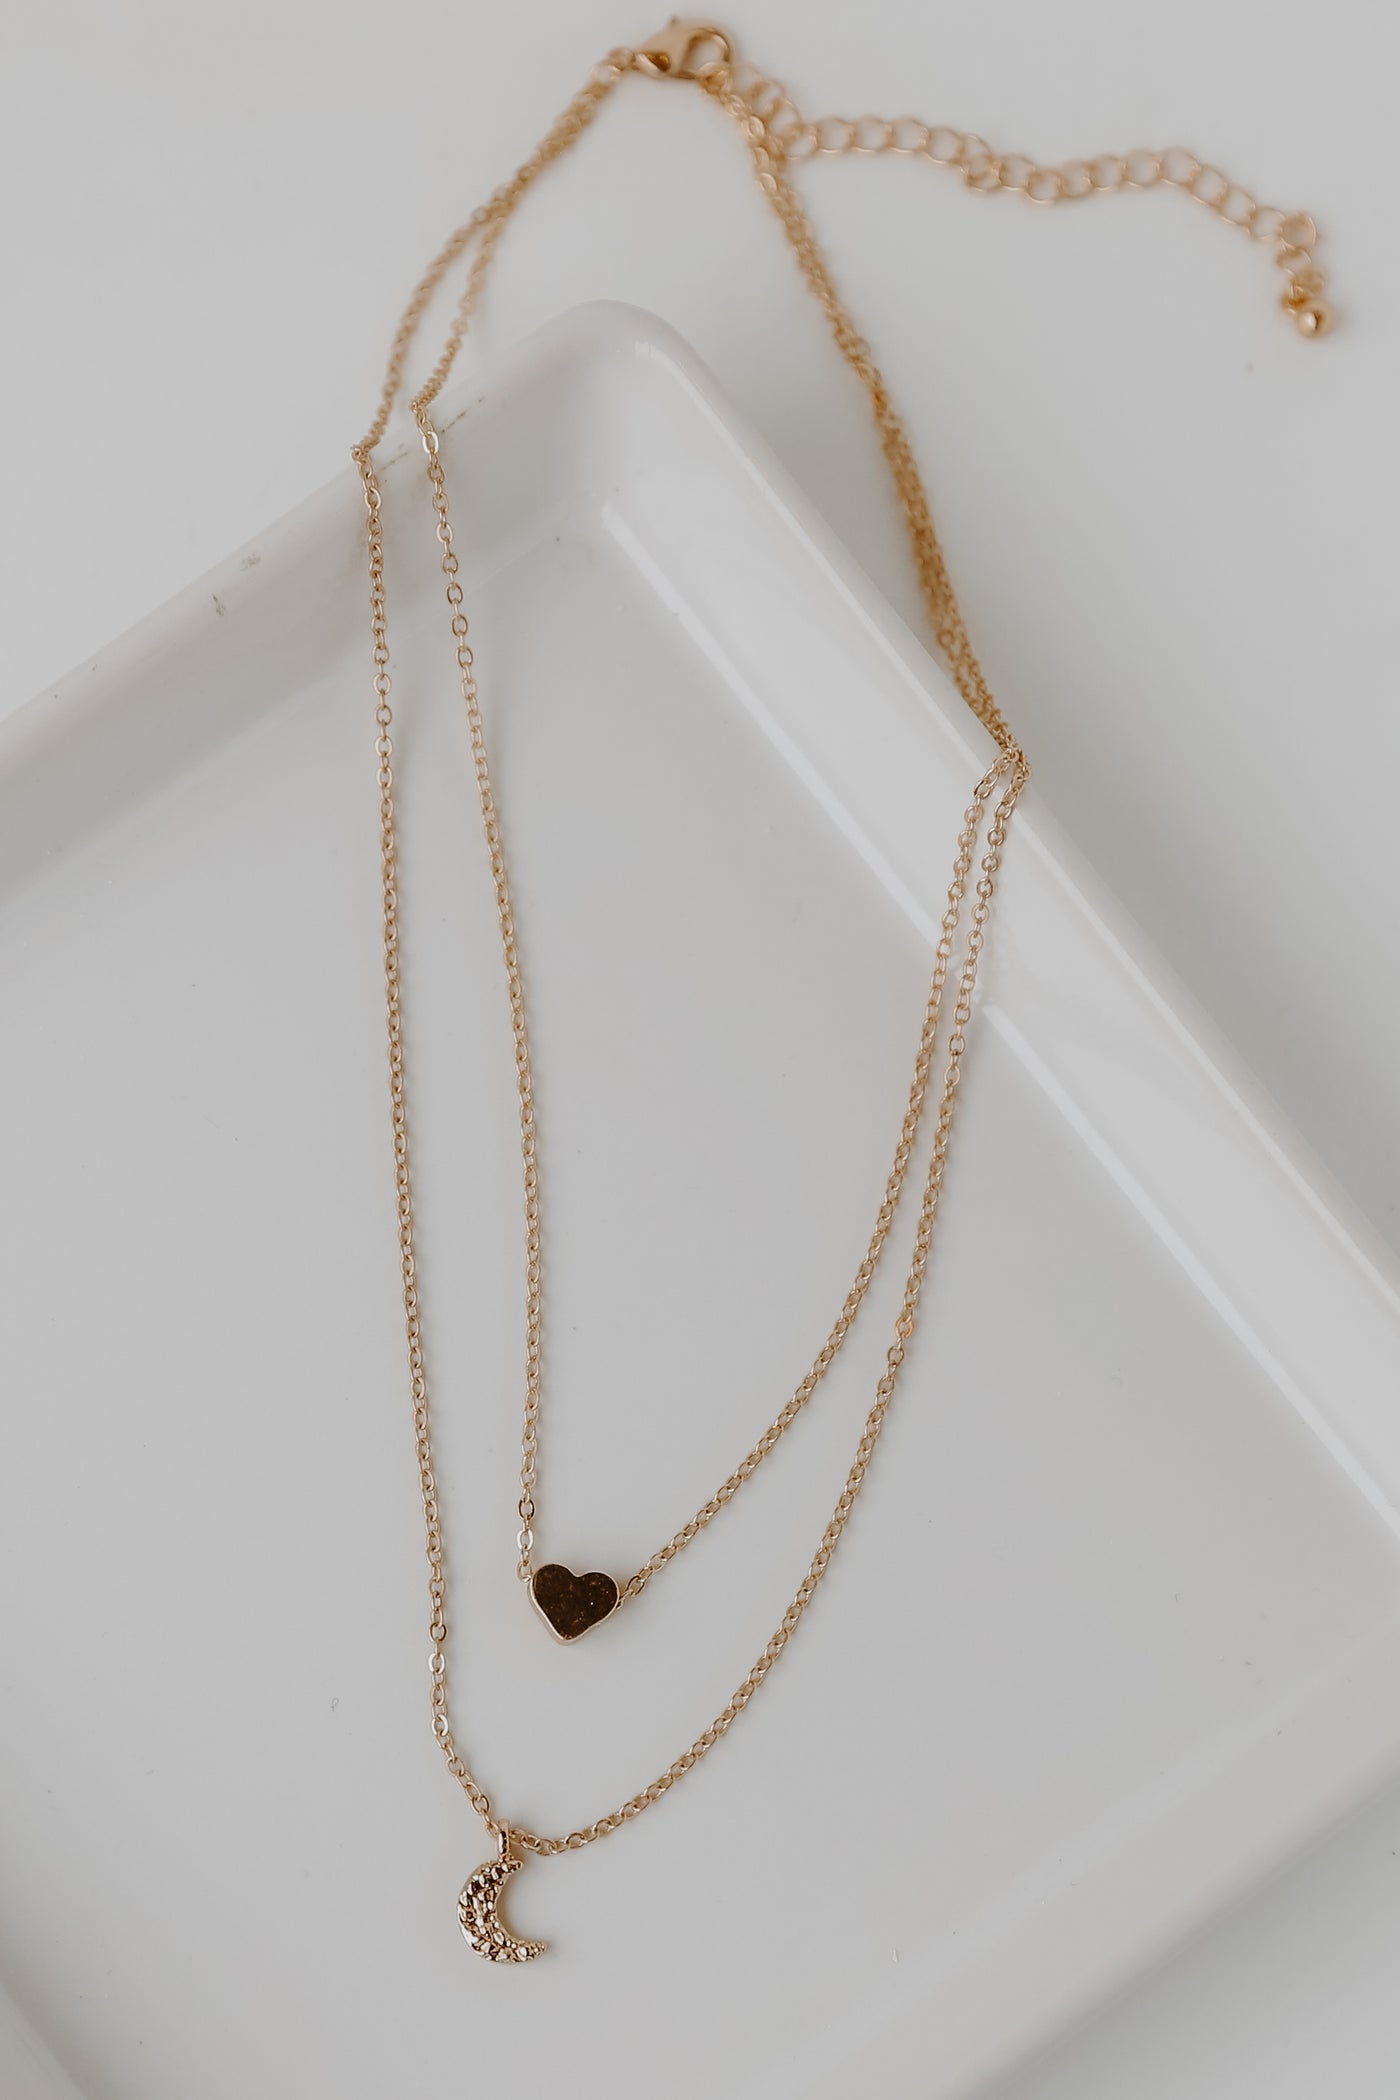 Gold Heart + Moon Layered Necklace from dress up